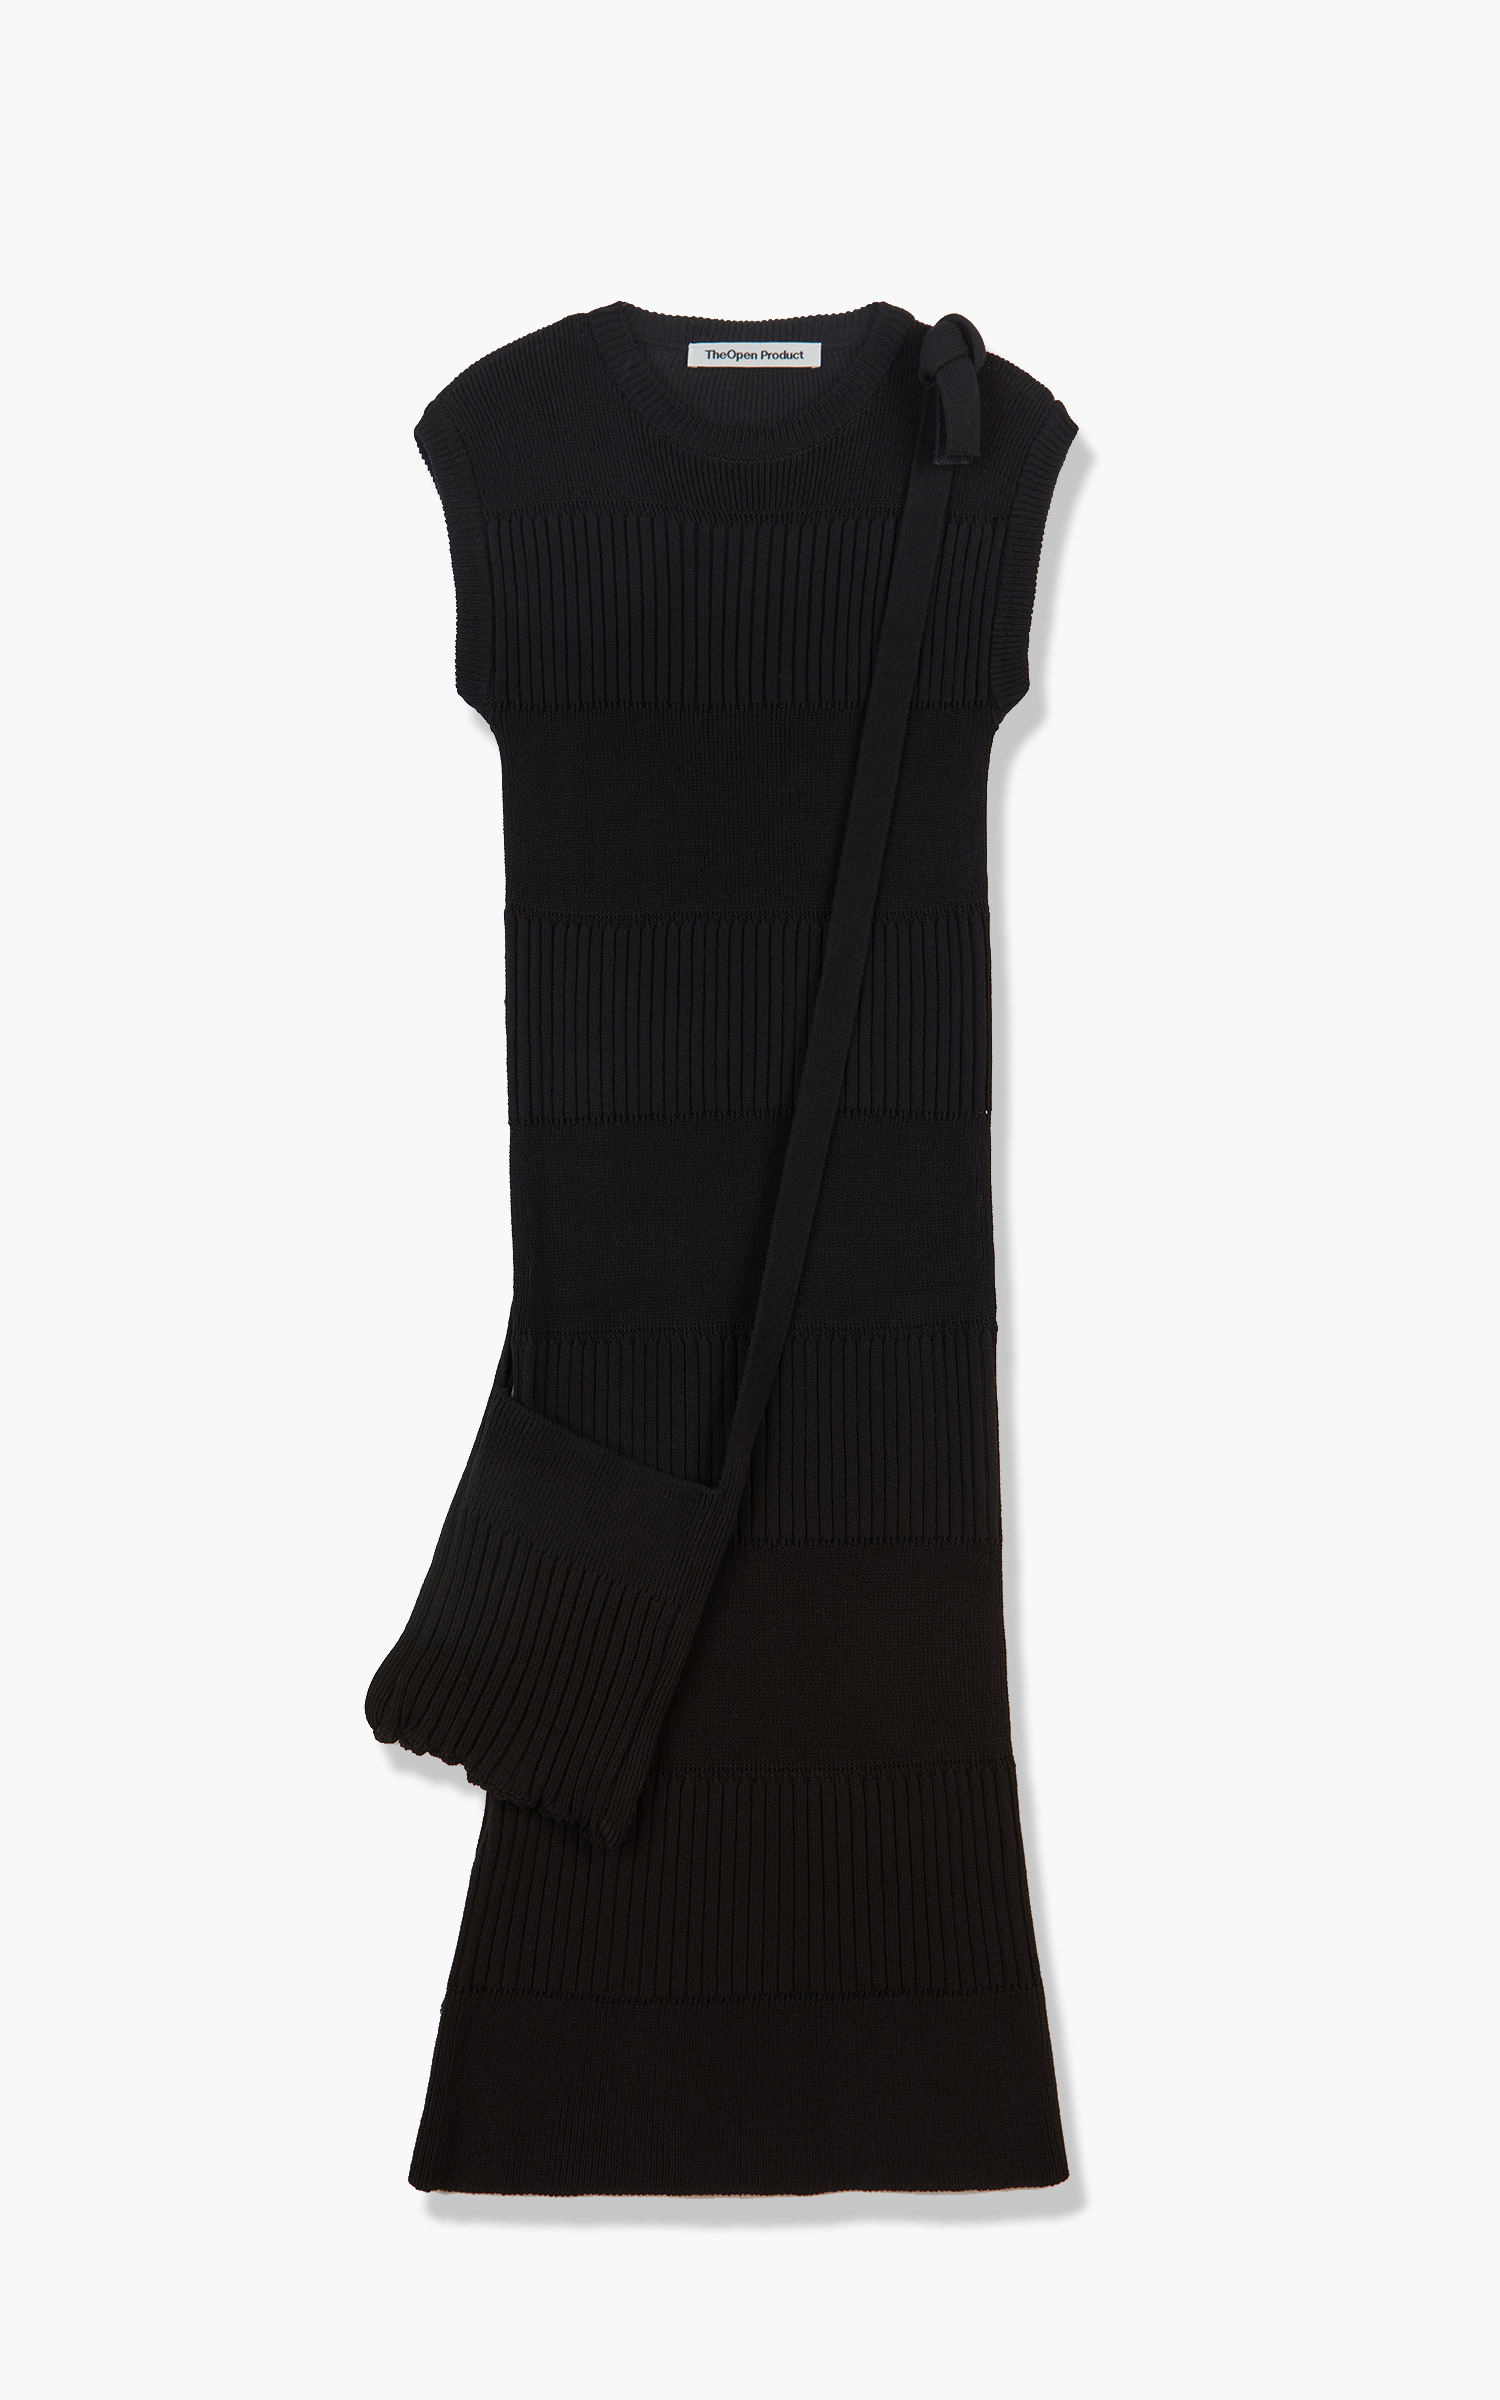 TheOpen Product Ribbed Block Knit Dress & Bag Black